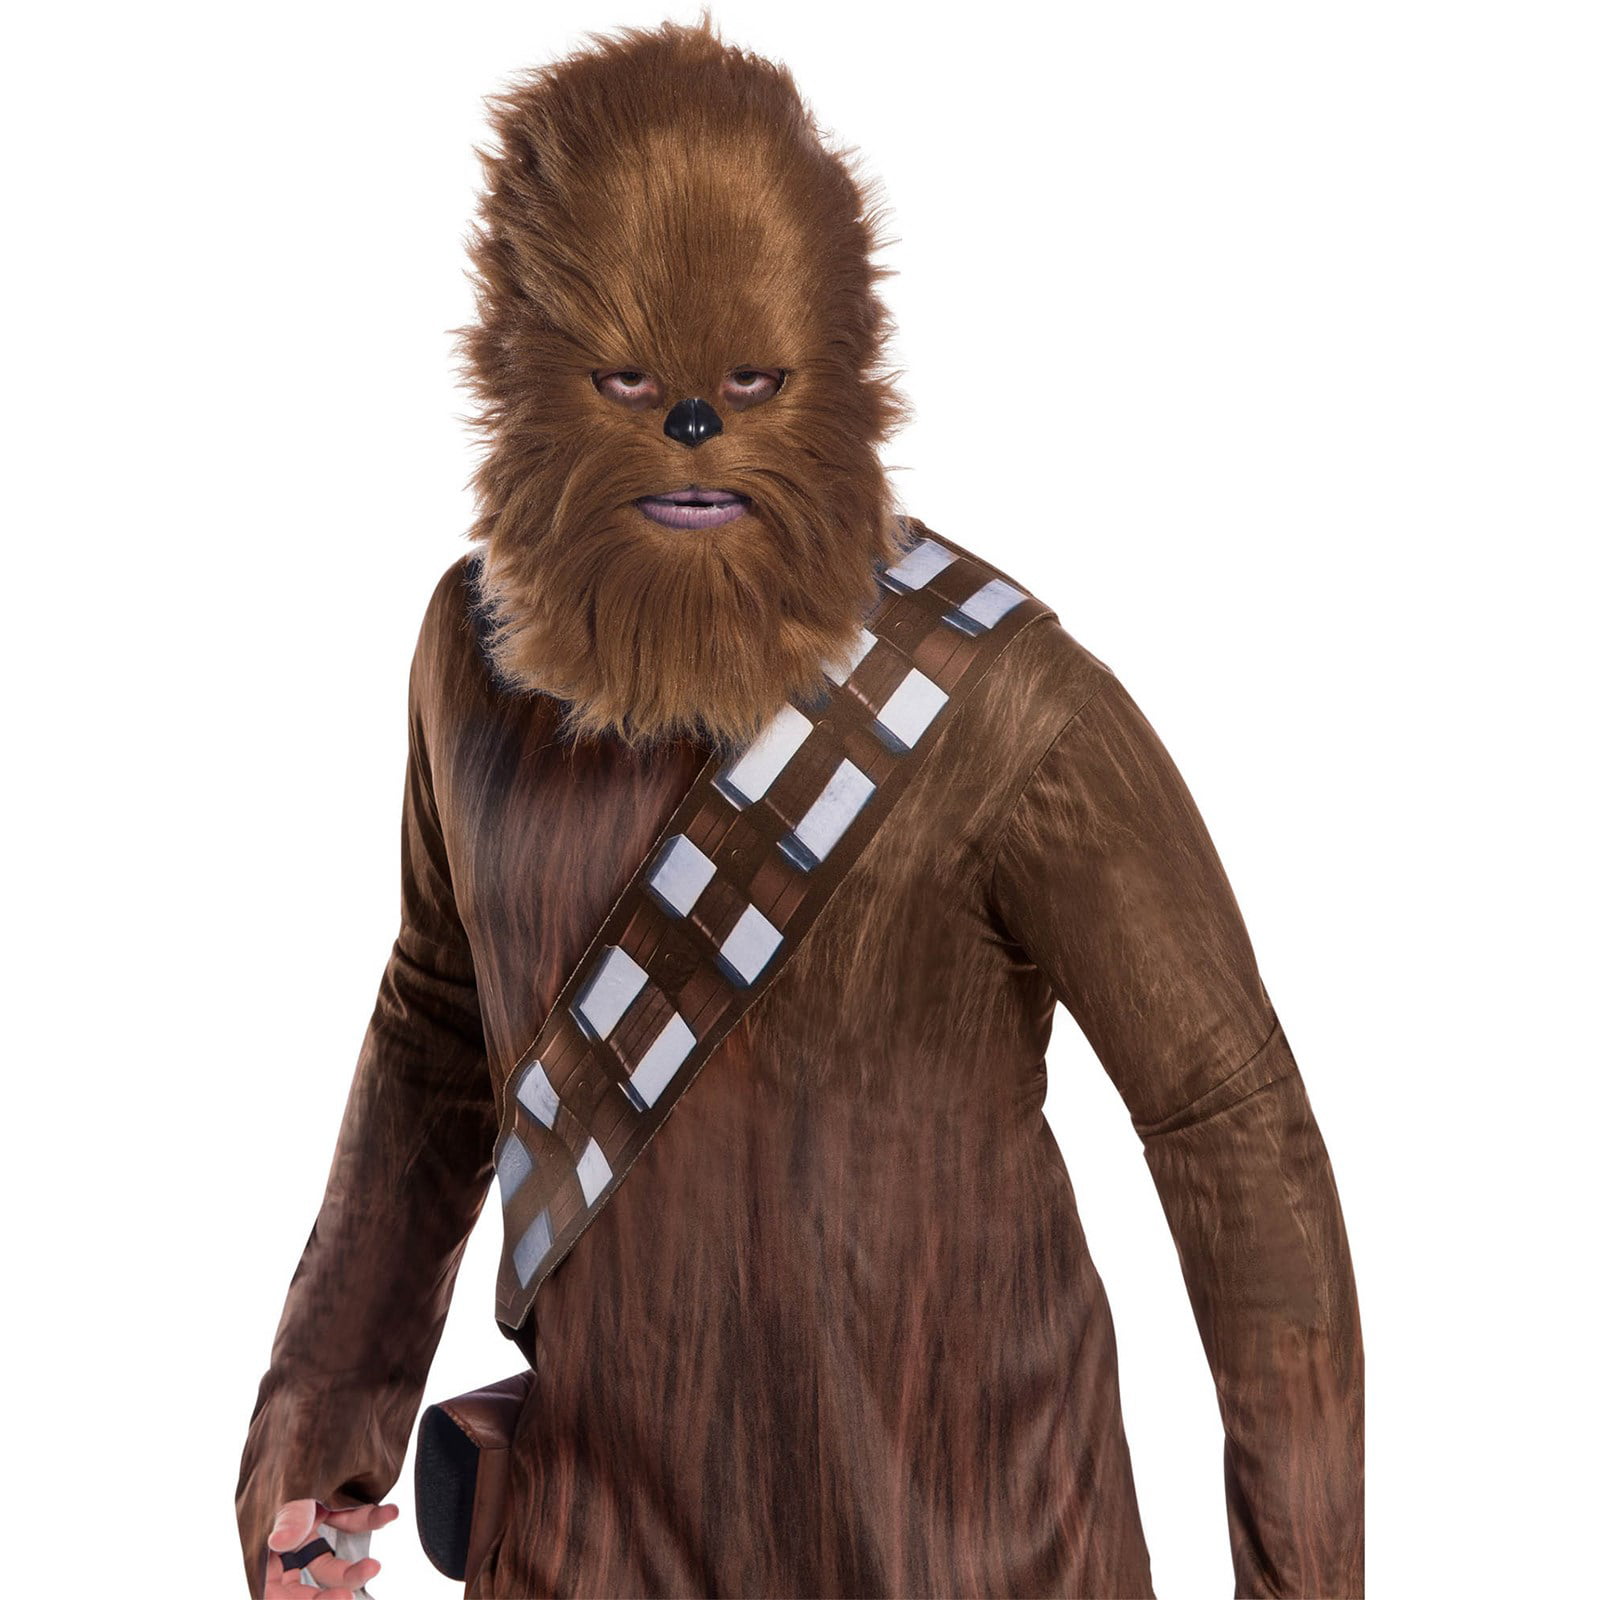 The Force Awakens Chewbacca Childs Costume Medium One Color Rubies Costume Star Wars VII 